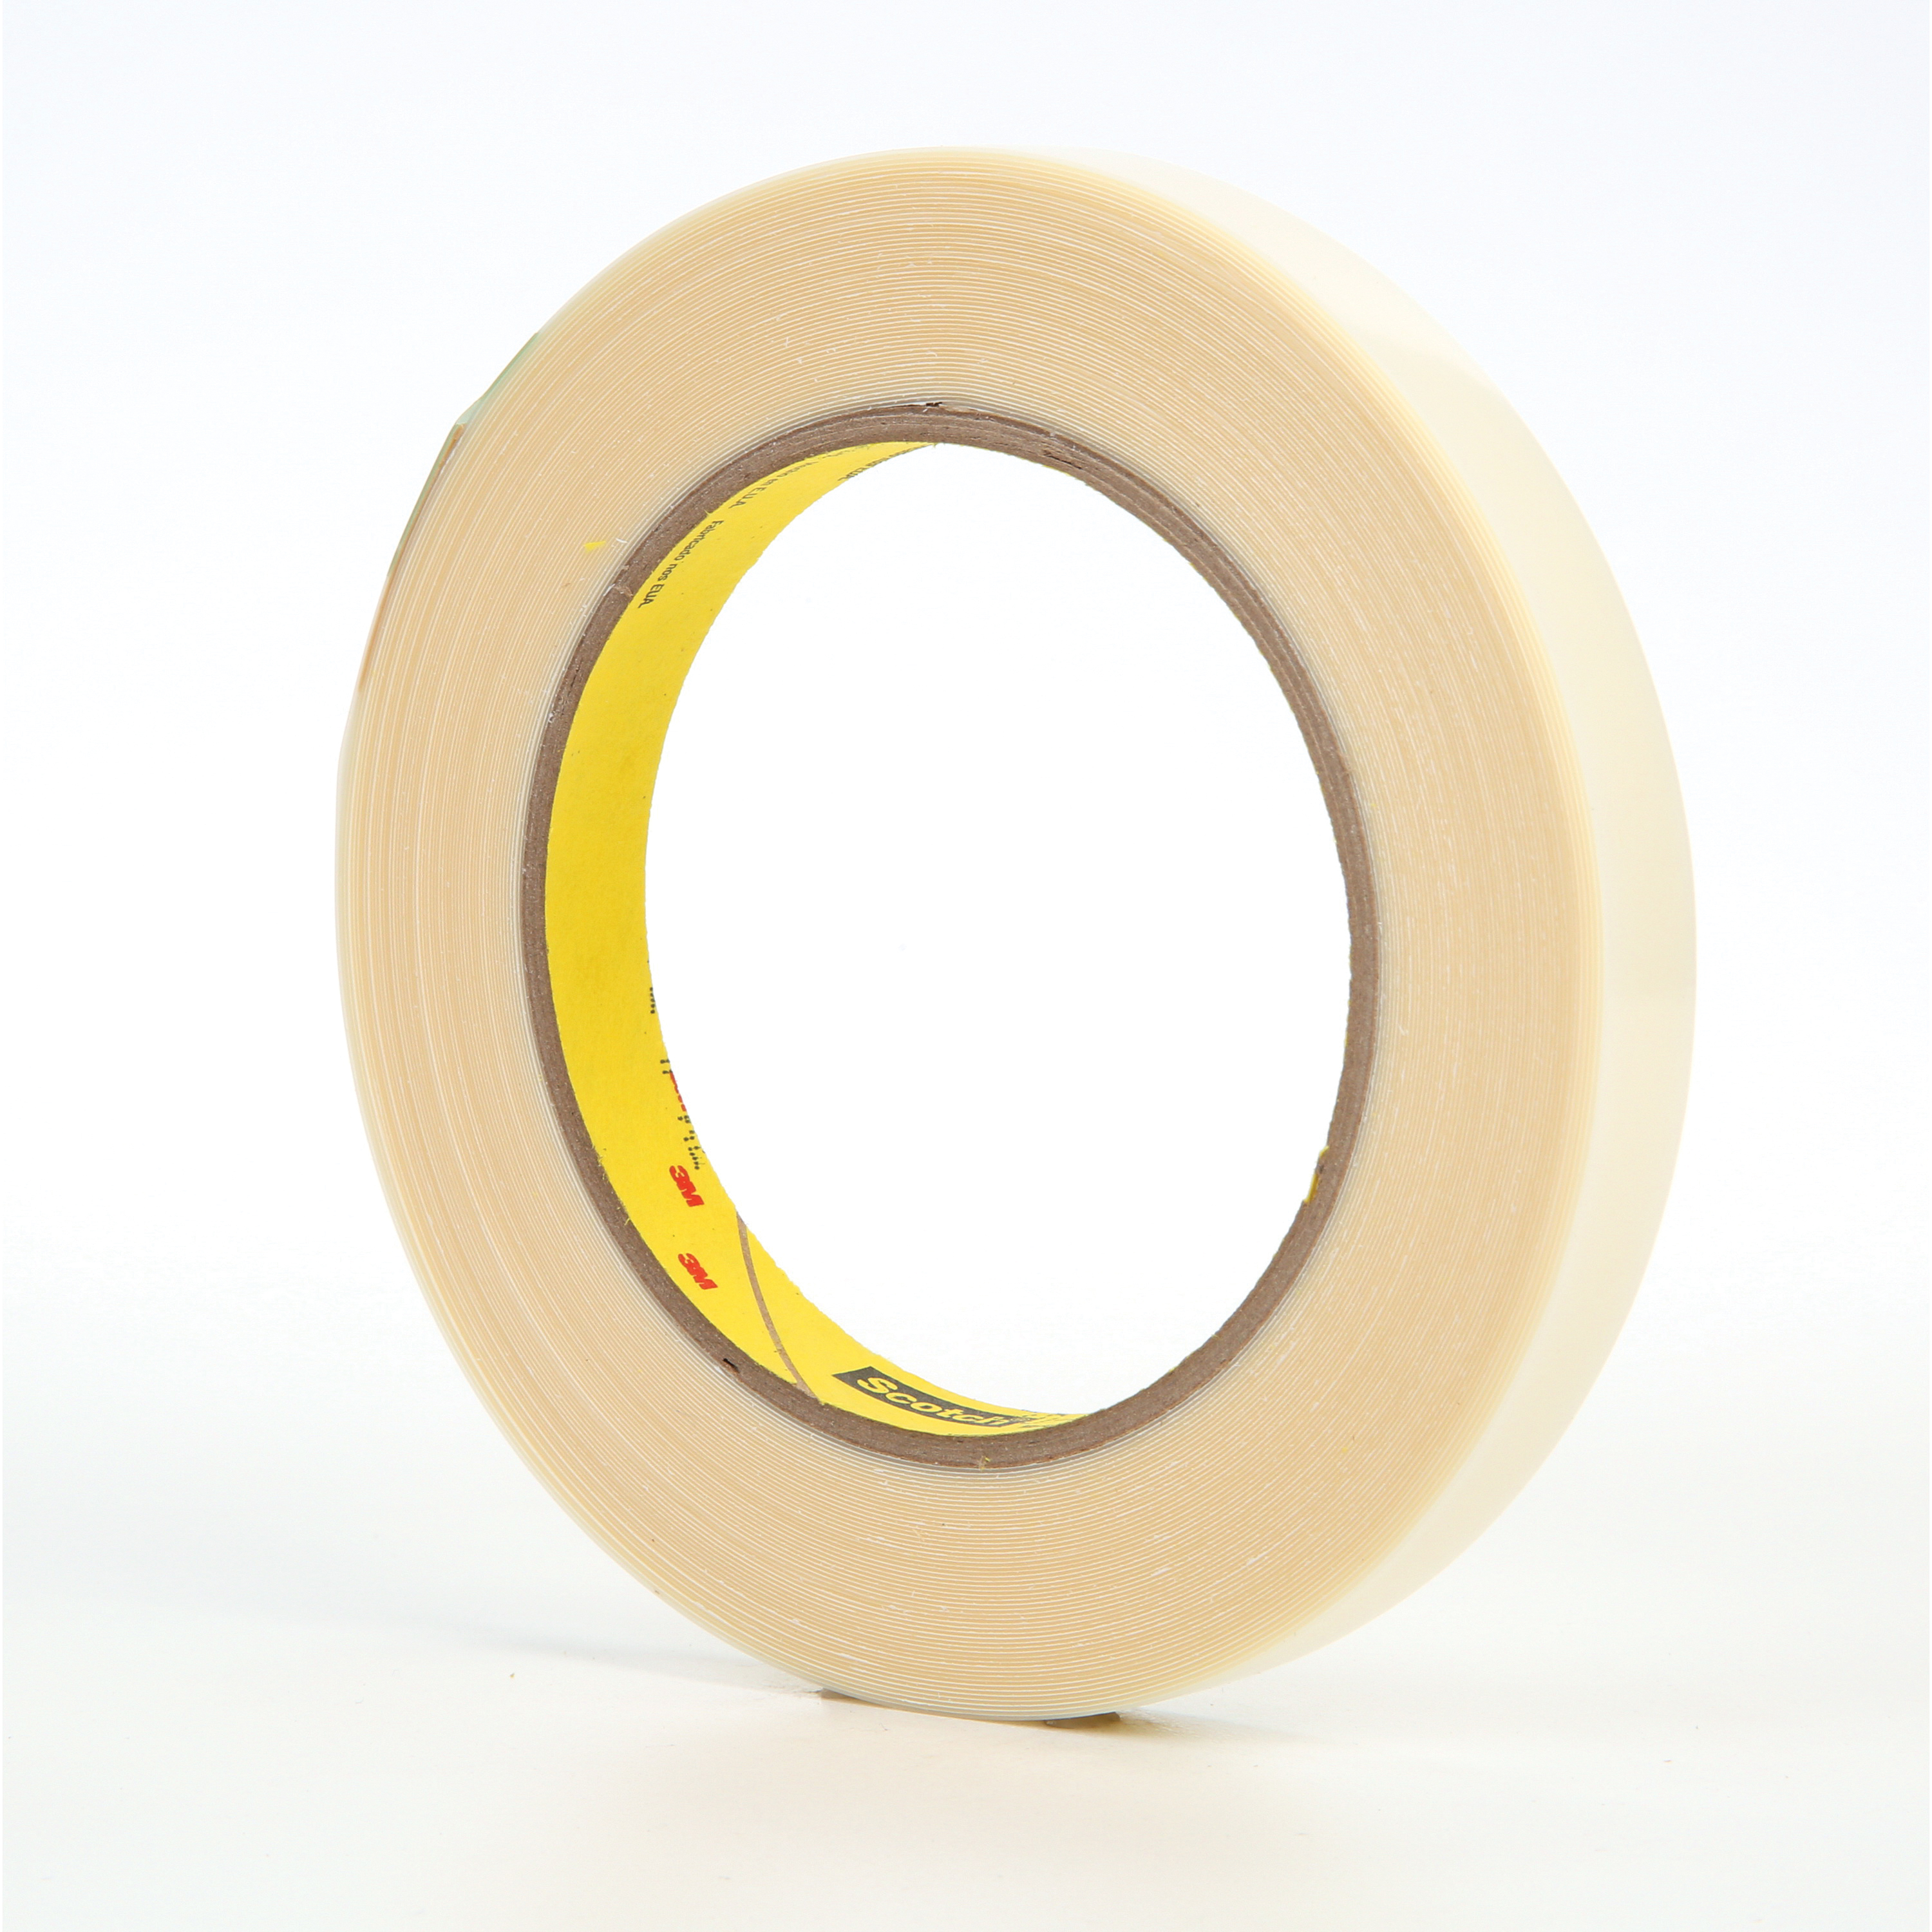 3M™ 021200-11990 Film Tape, 18 yd L x 1/2 in W, 11.7 mil THK, Rubber Adhesive, UHMWP Backing, Transparent